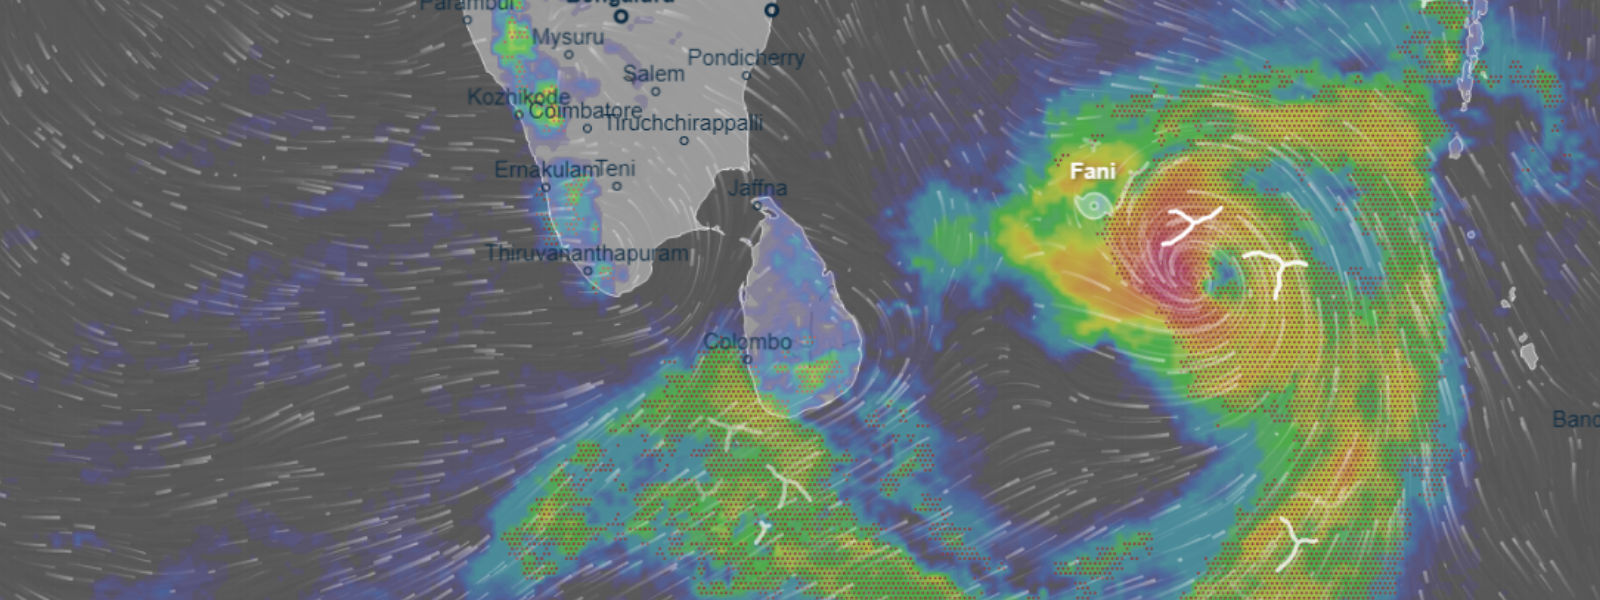 FANI to intensify into a severe cyclonic storm 